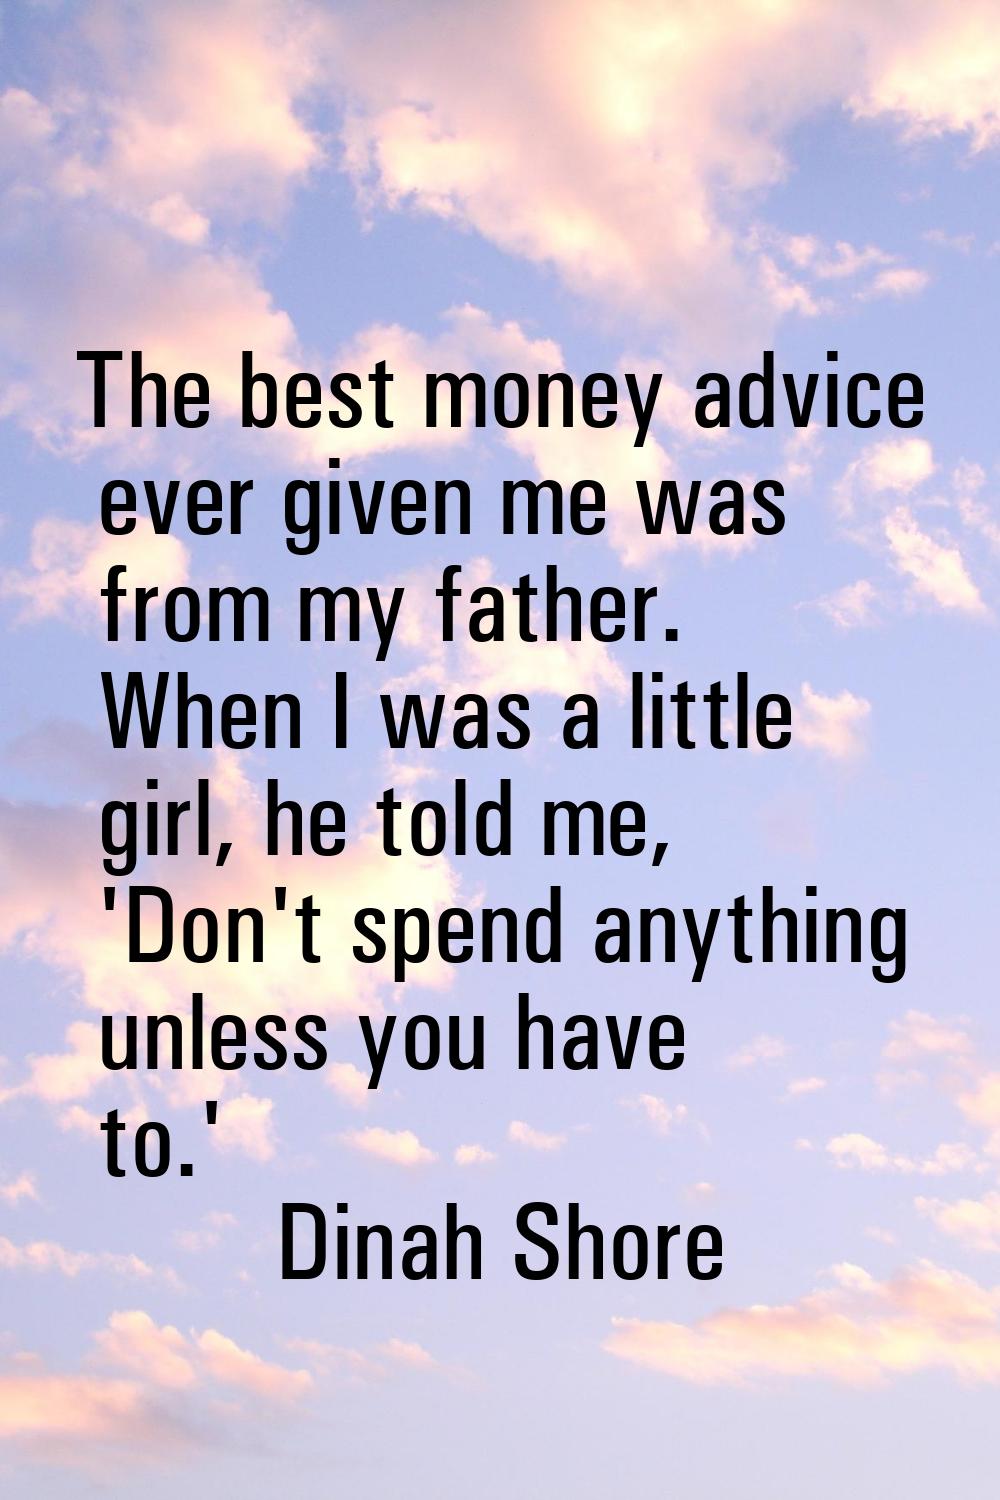 The best money advice ever given me was from my father. When I was a little girl, he told me, 'Don'